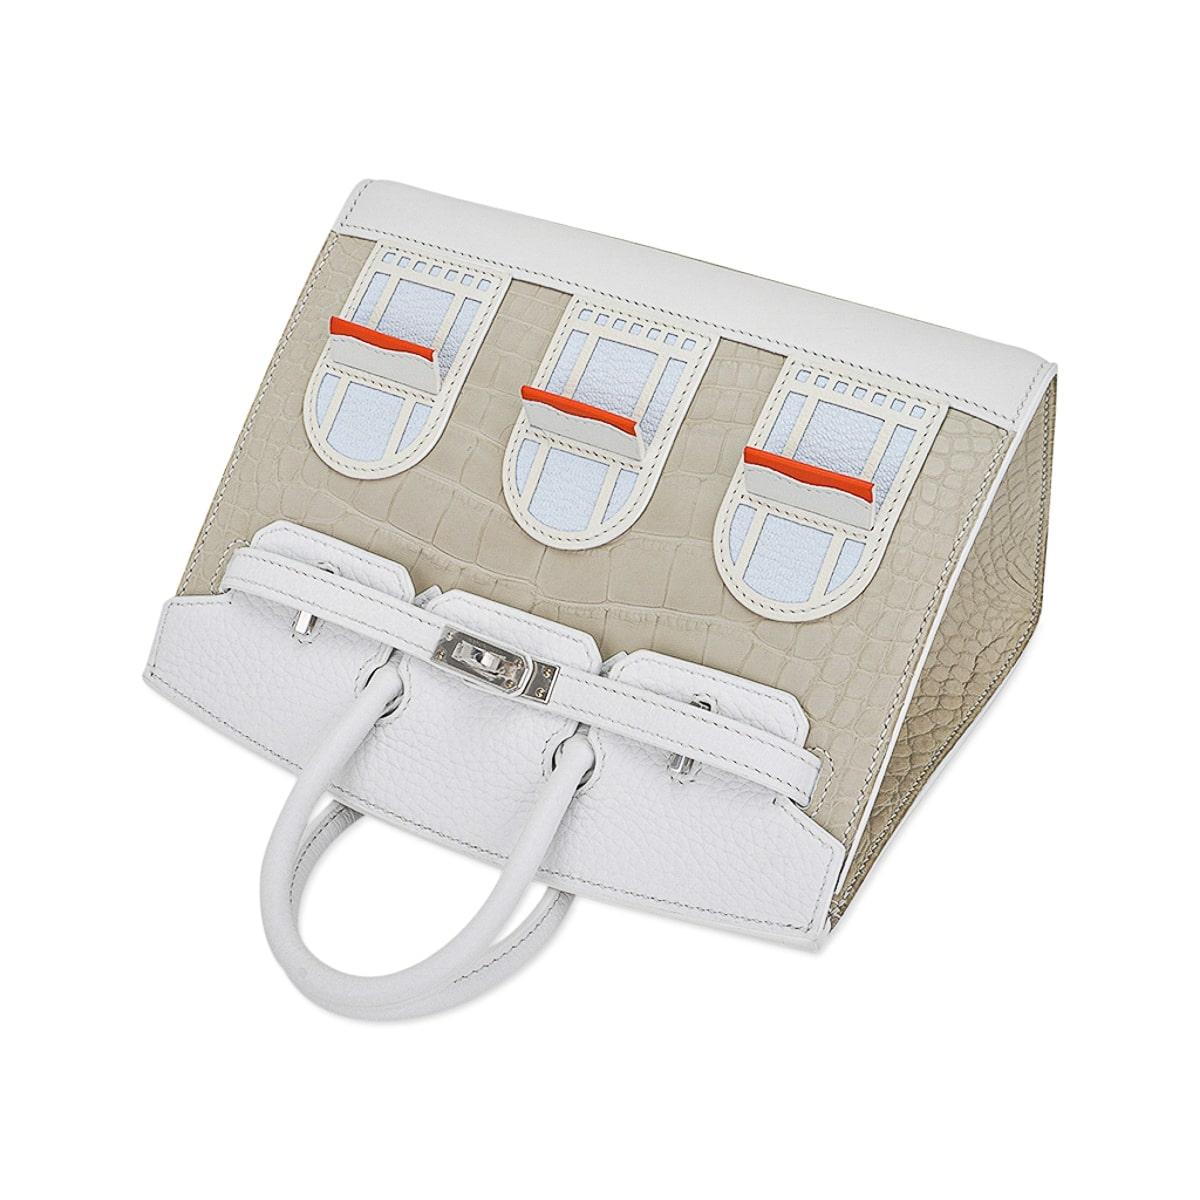 Hermes Birkin Faubourg20 Sellier Neige (Snow) White Alligator Bag In New Condition For Sale In Miami, FL